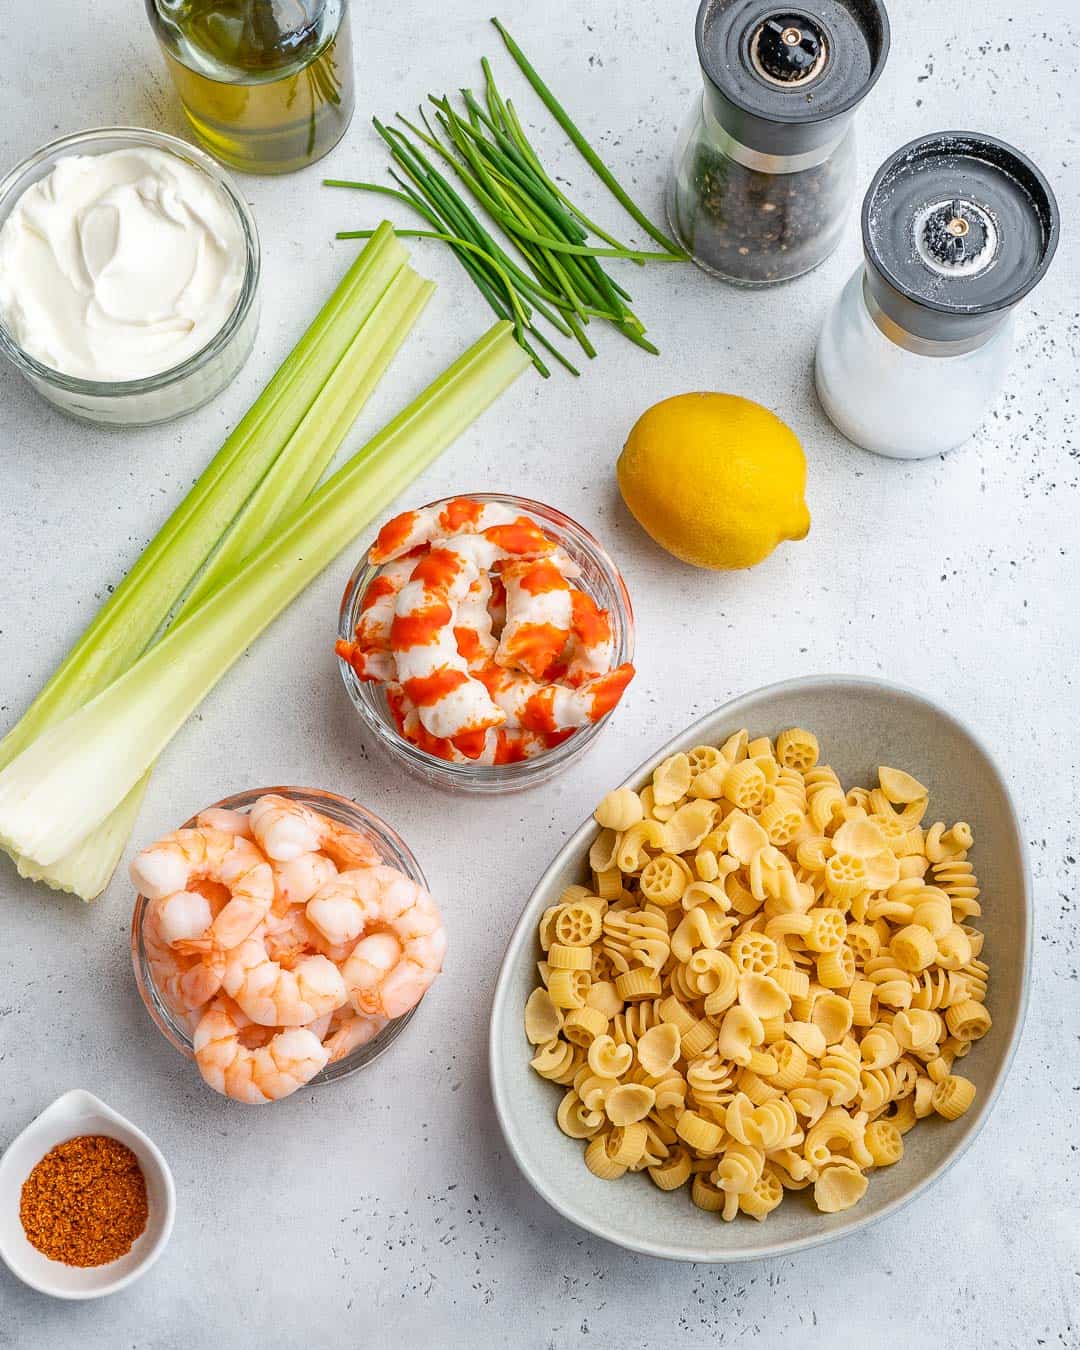 ingredients shown used to make the pasta salad 